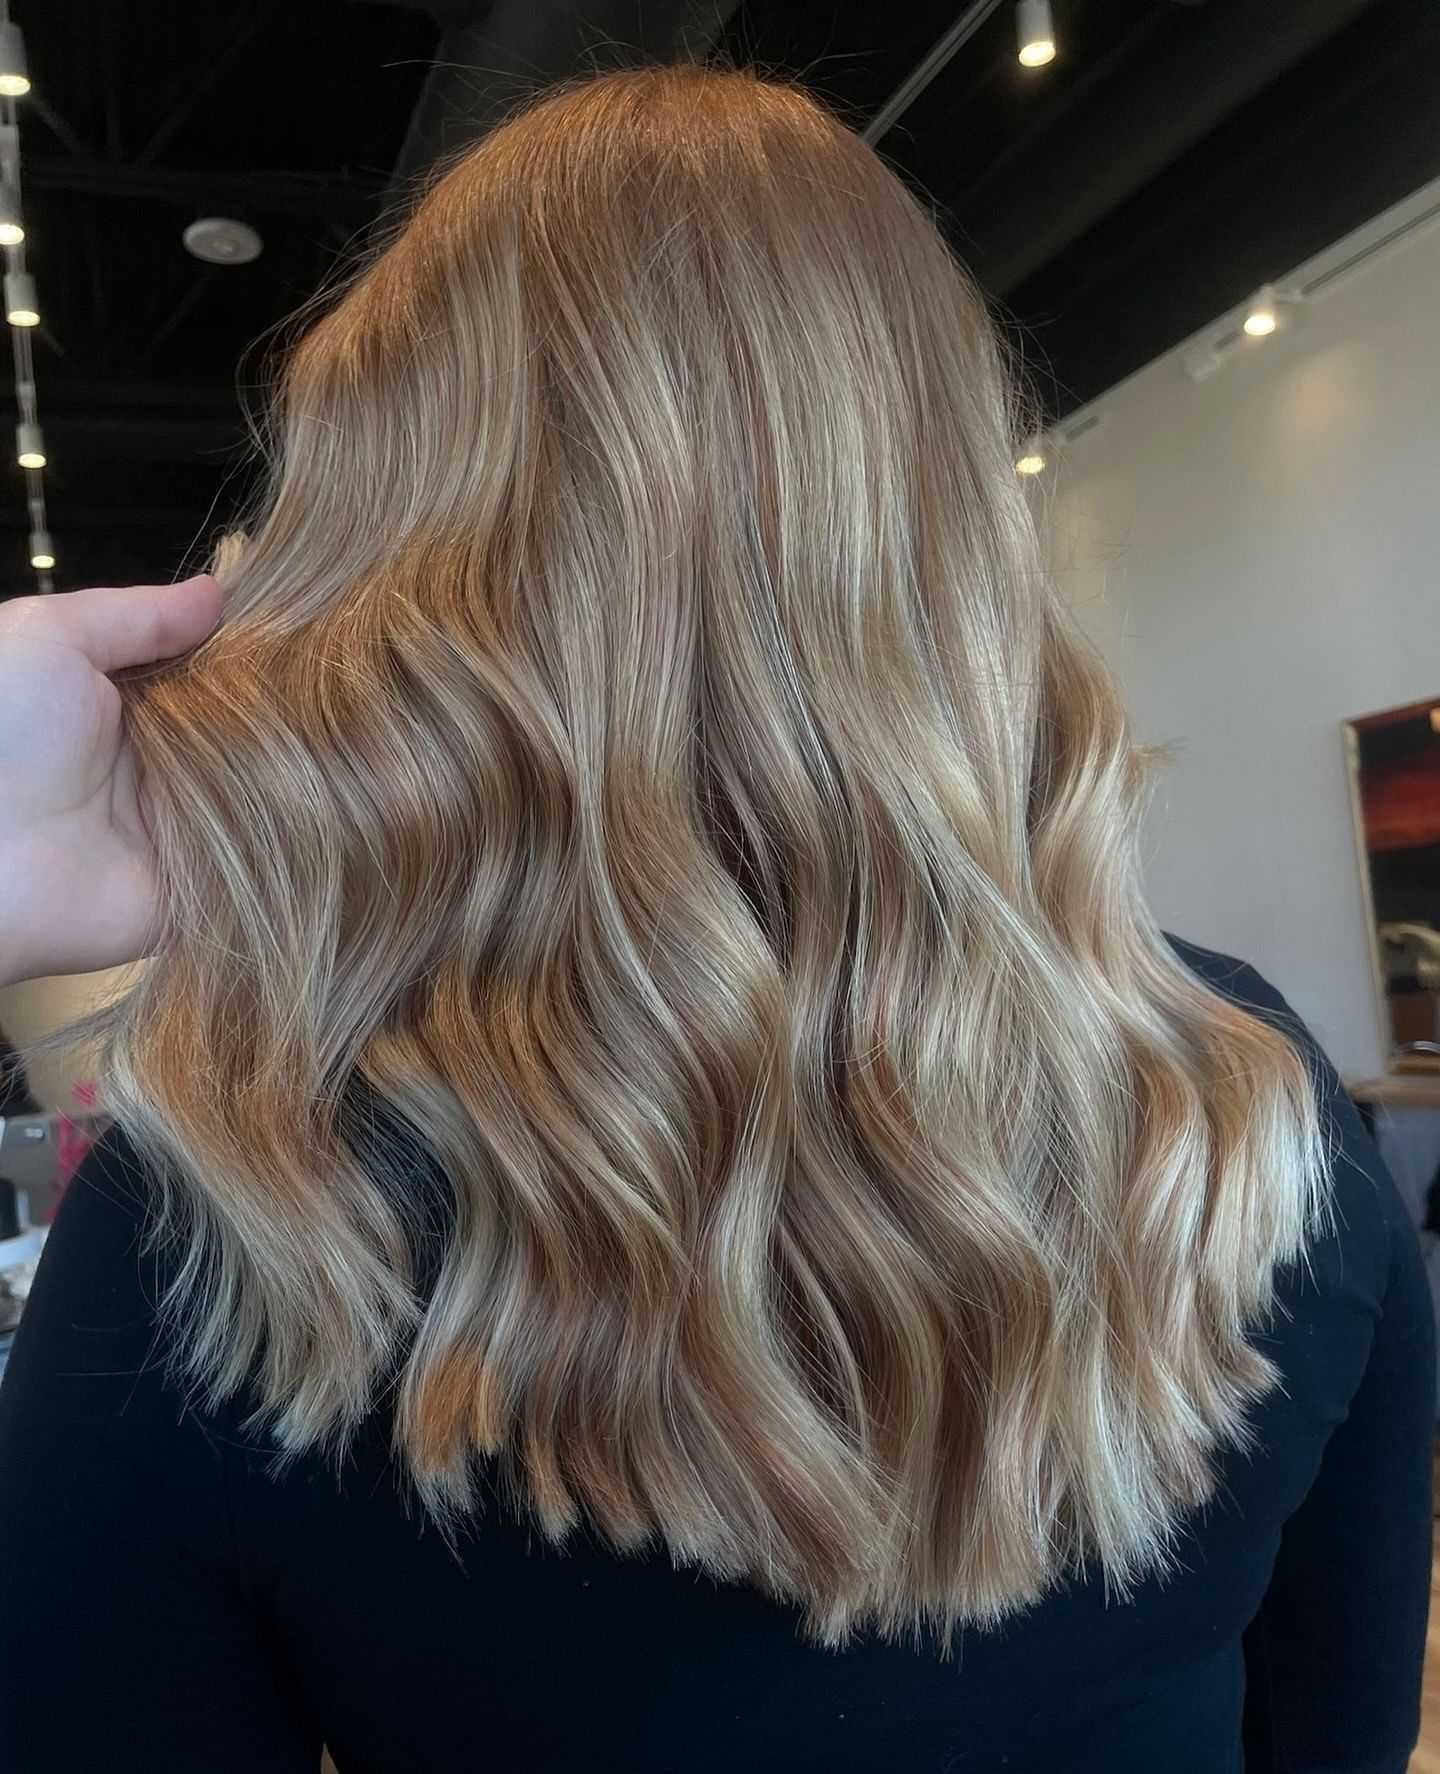 Back view of person with wavy caramel blonde hair.